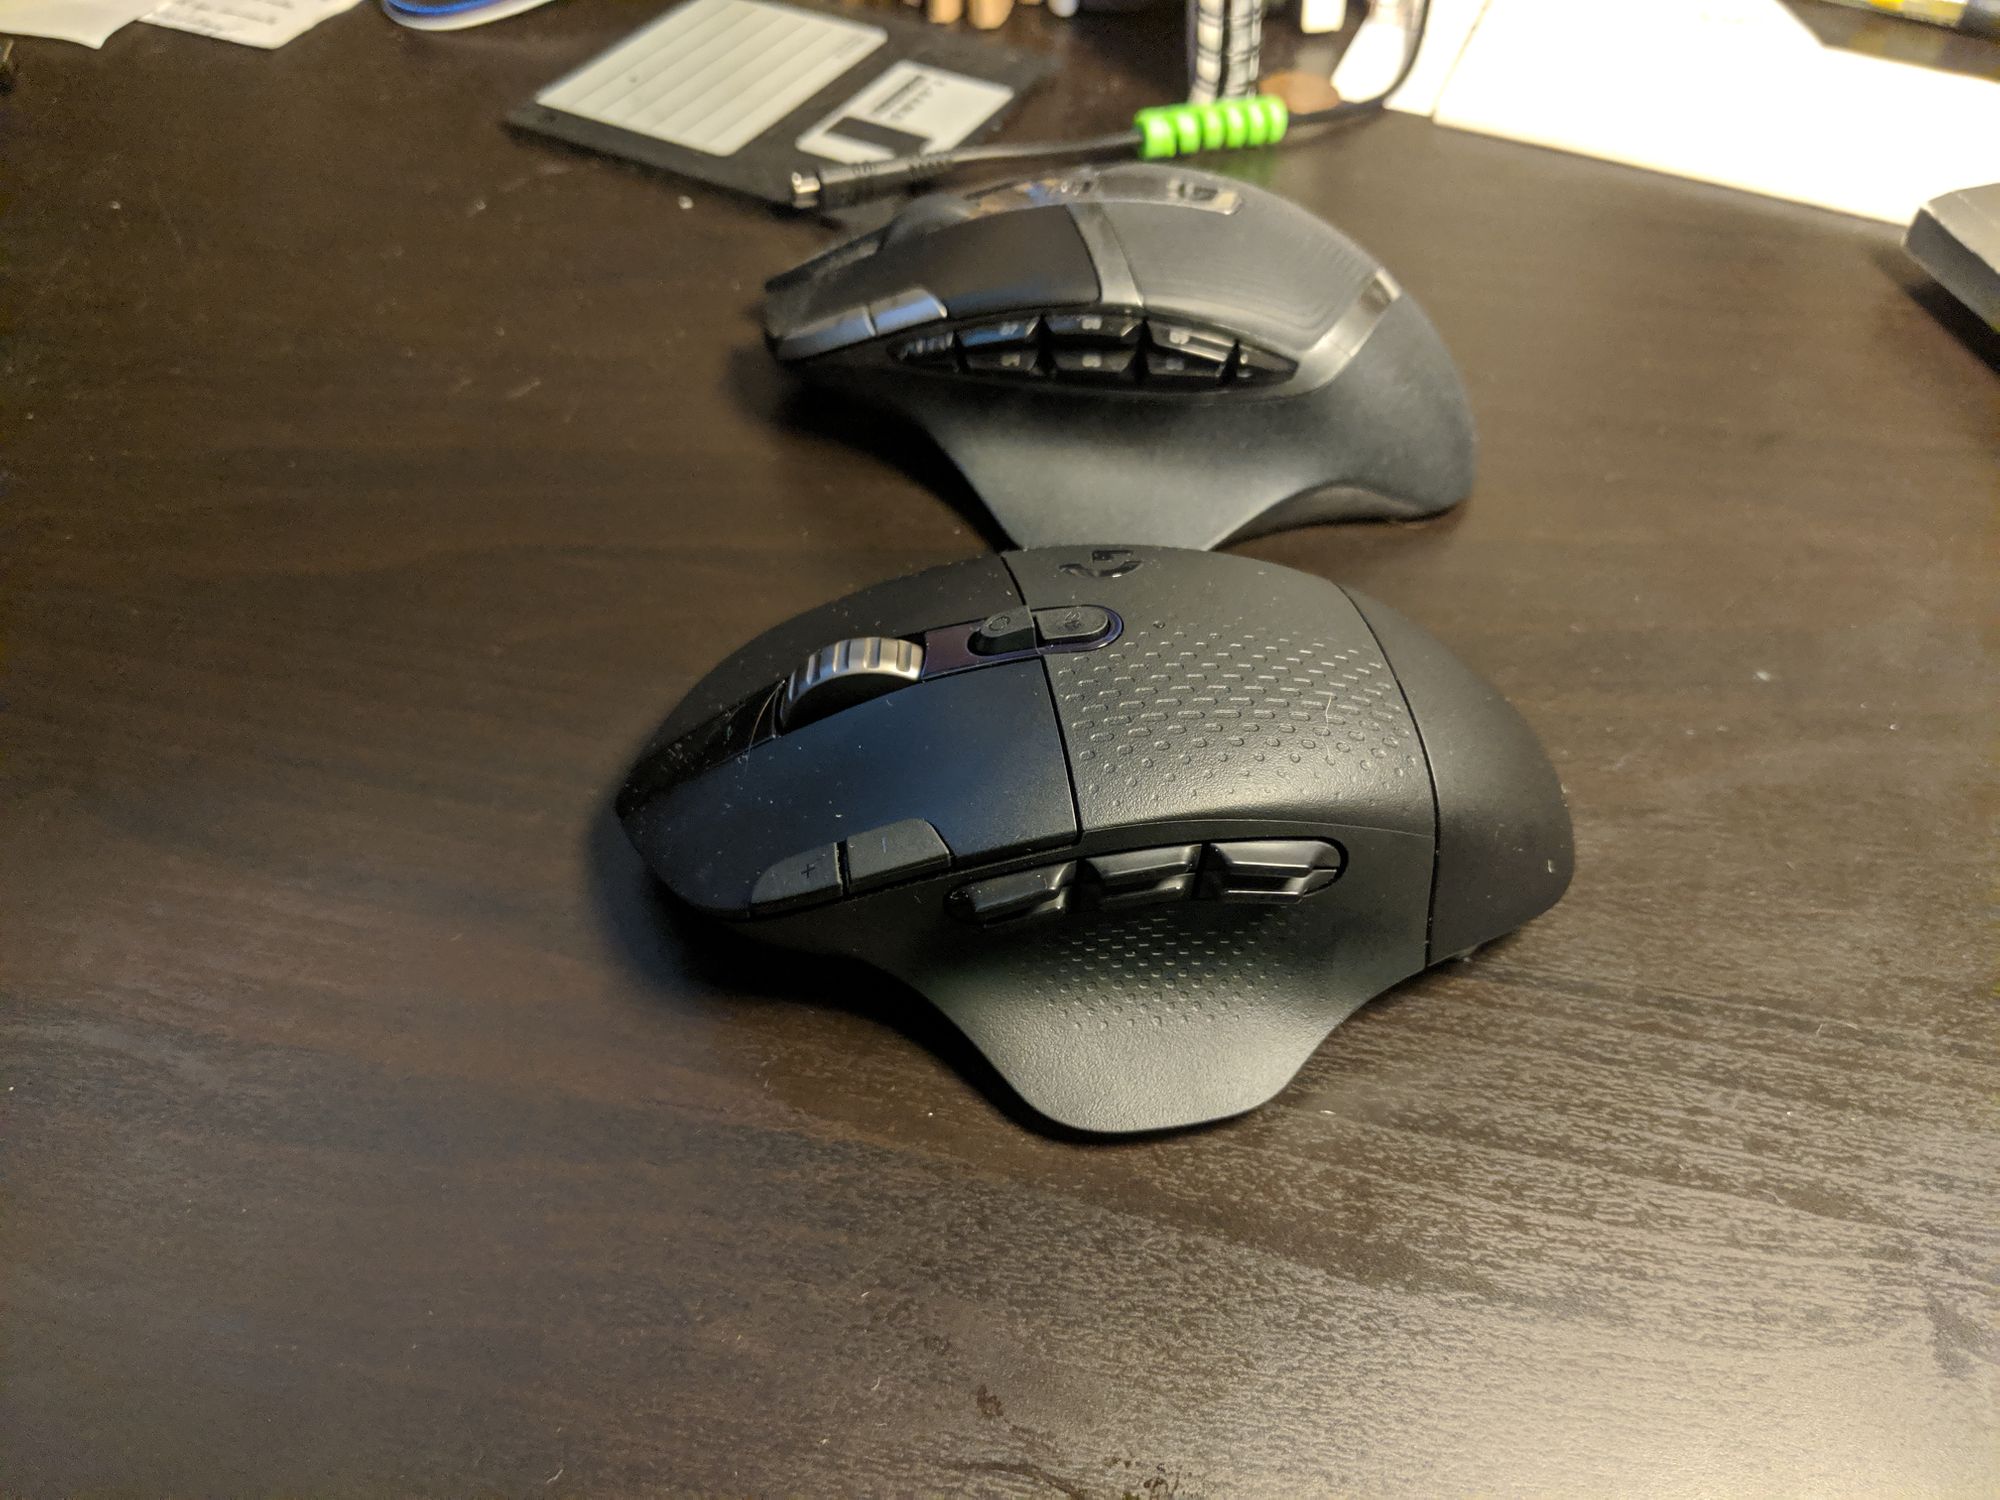 pc equivalent to steermouse